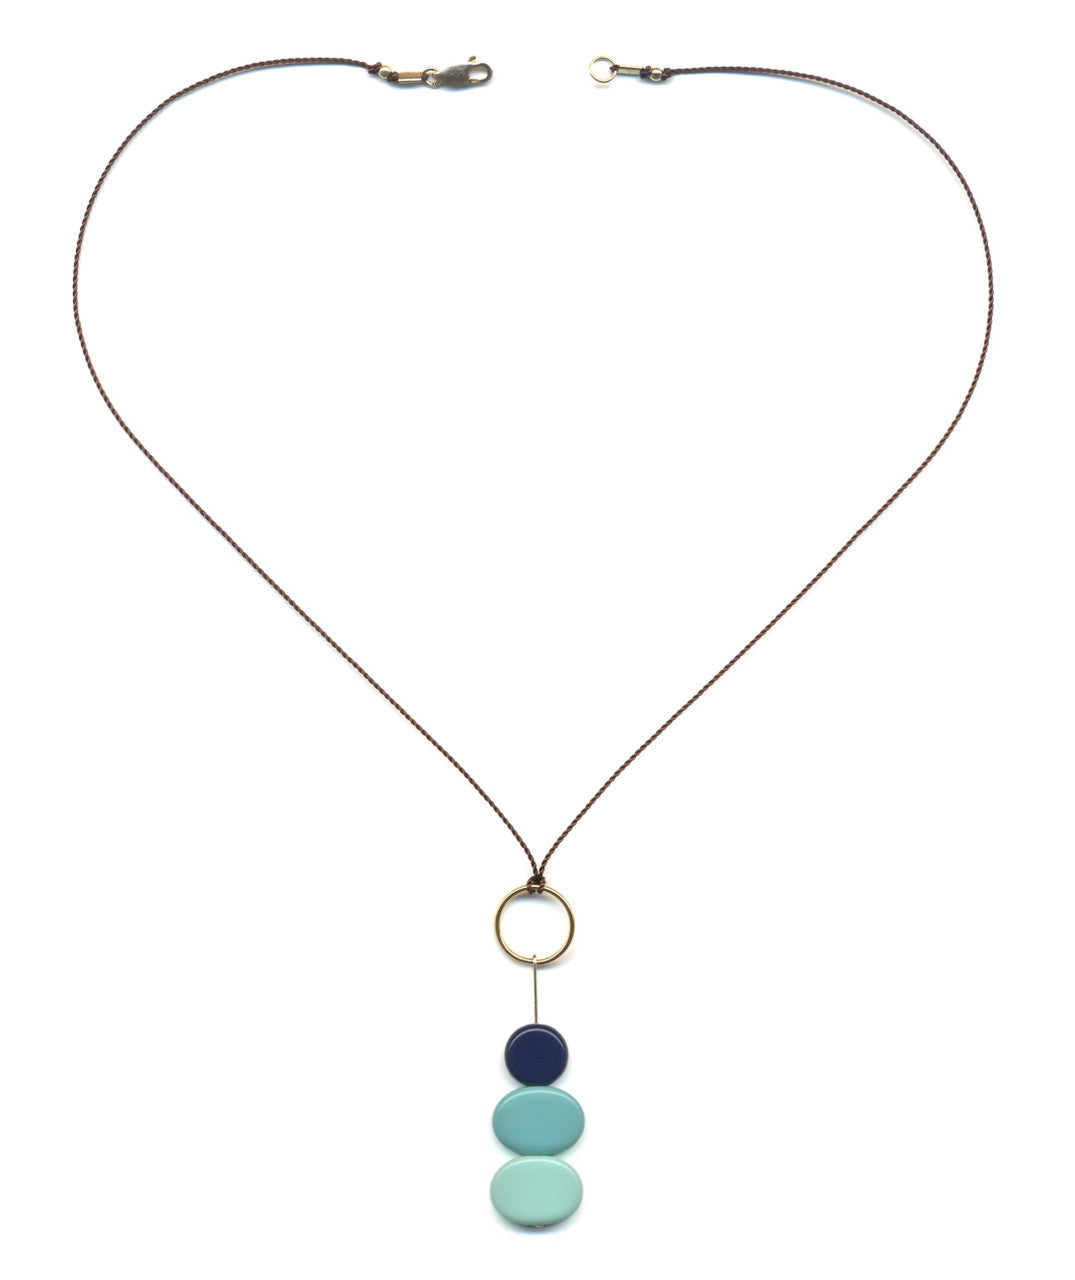 irk-n1842 Necklace by I. Ronni Kappos  (IRK Jewelry)